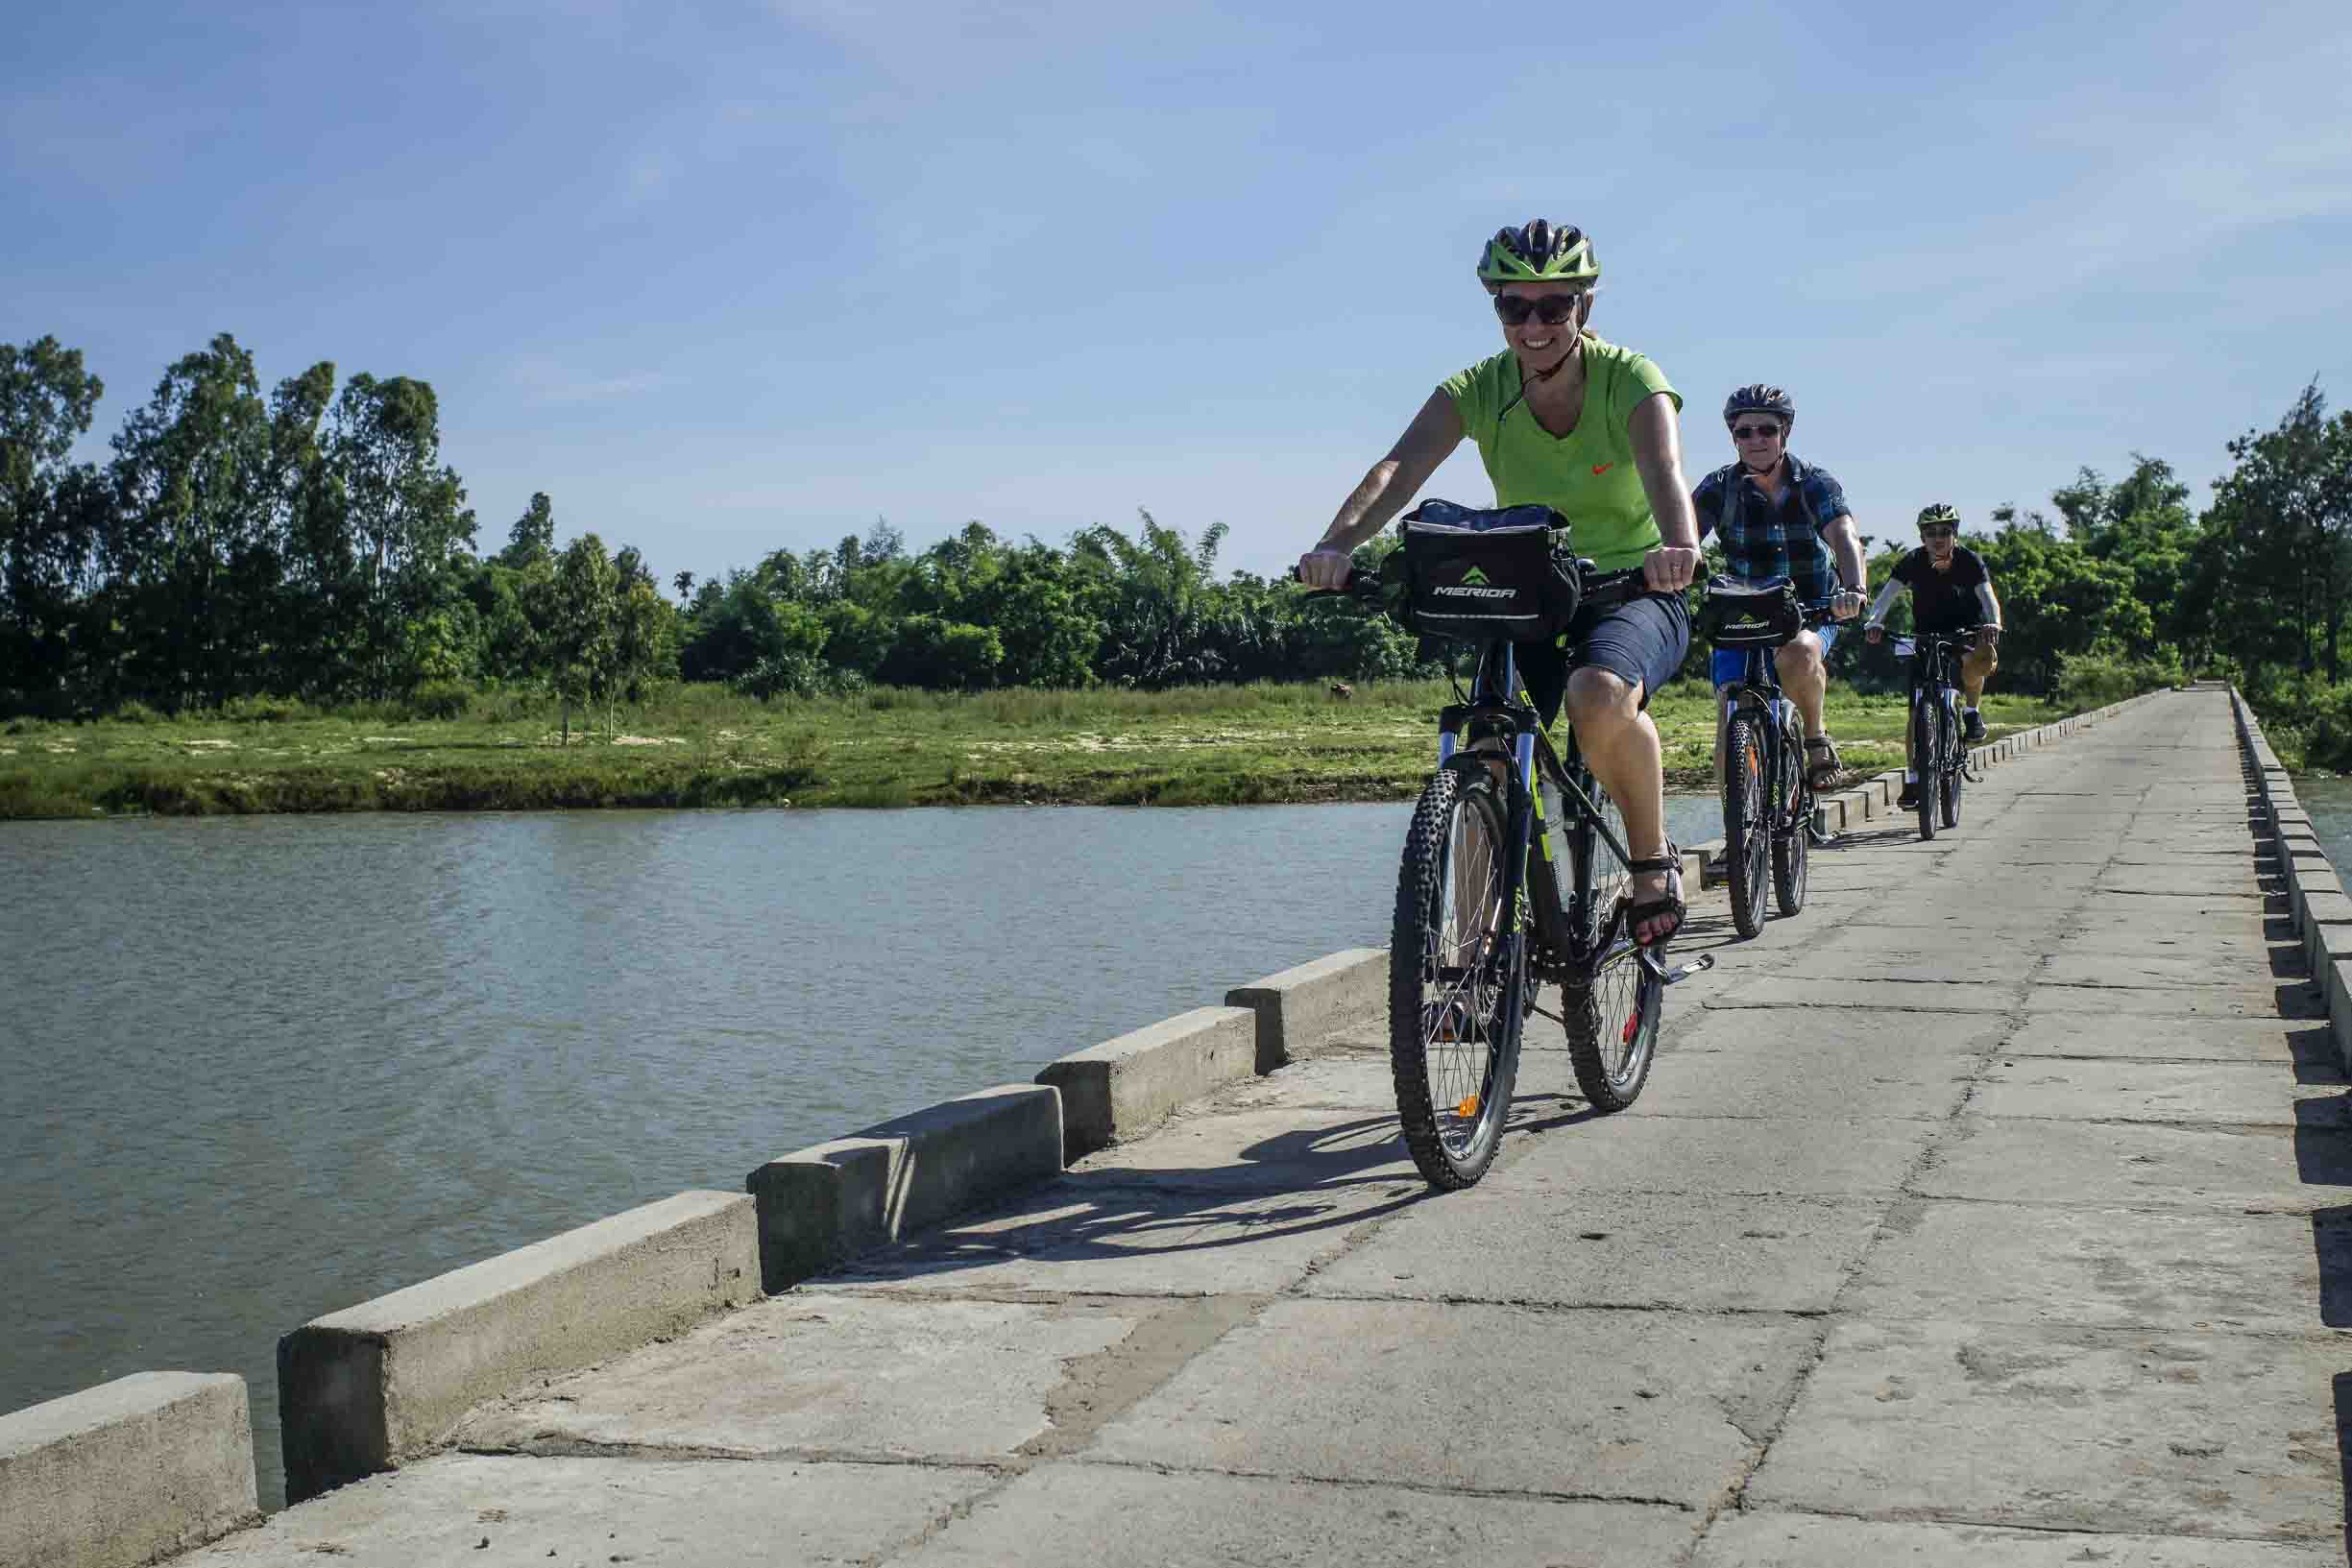 Countryside Bicycle Tour from Hoi An